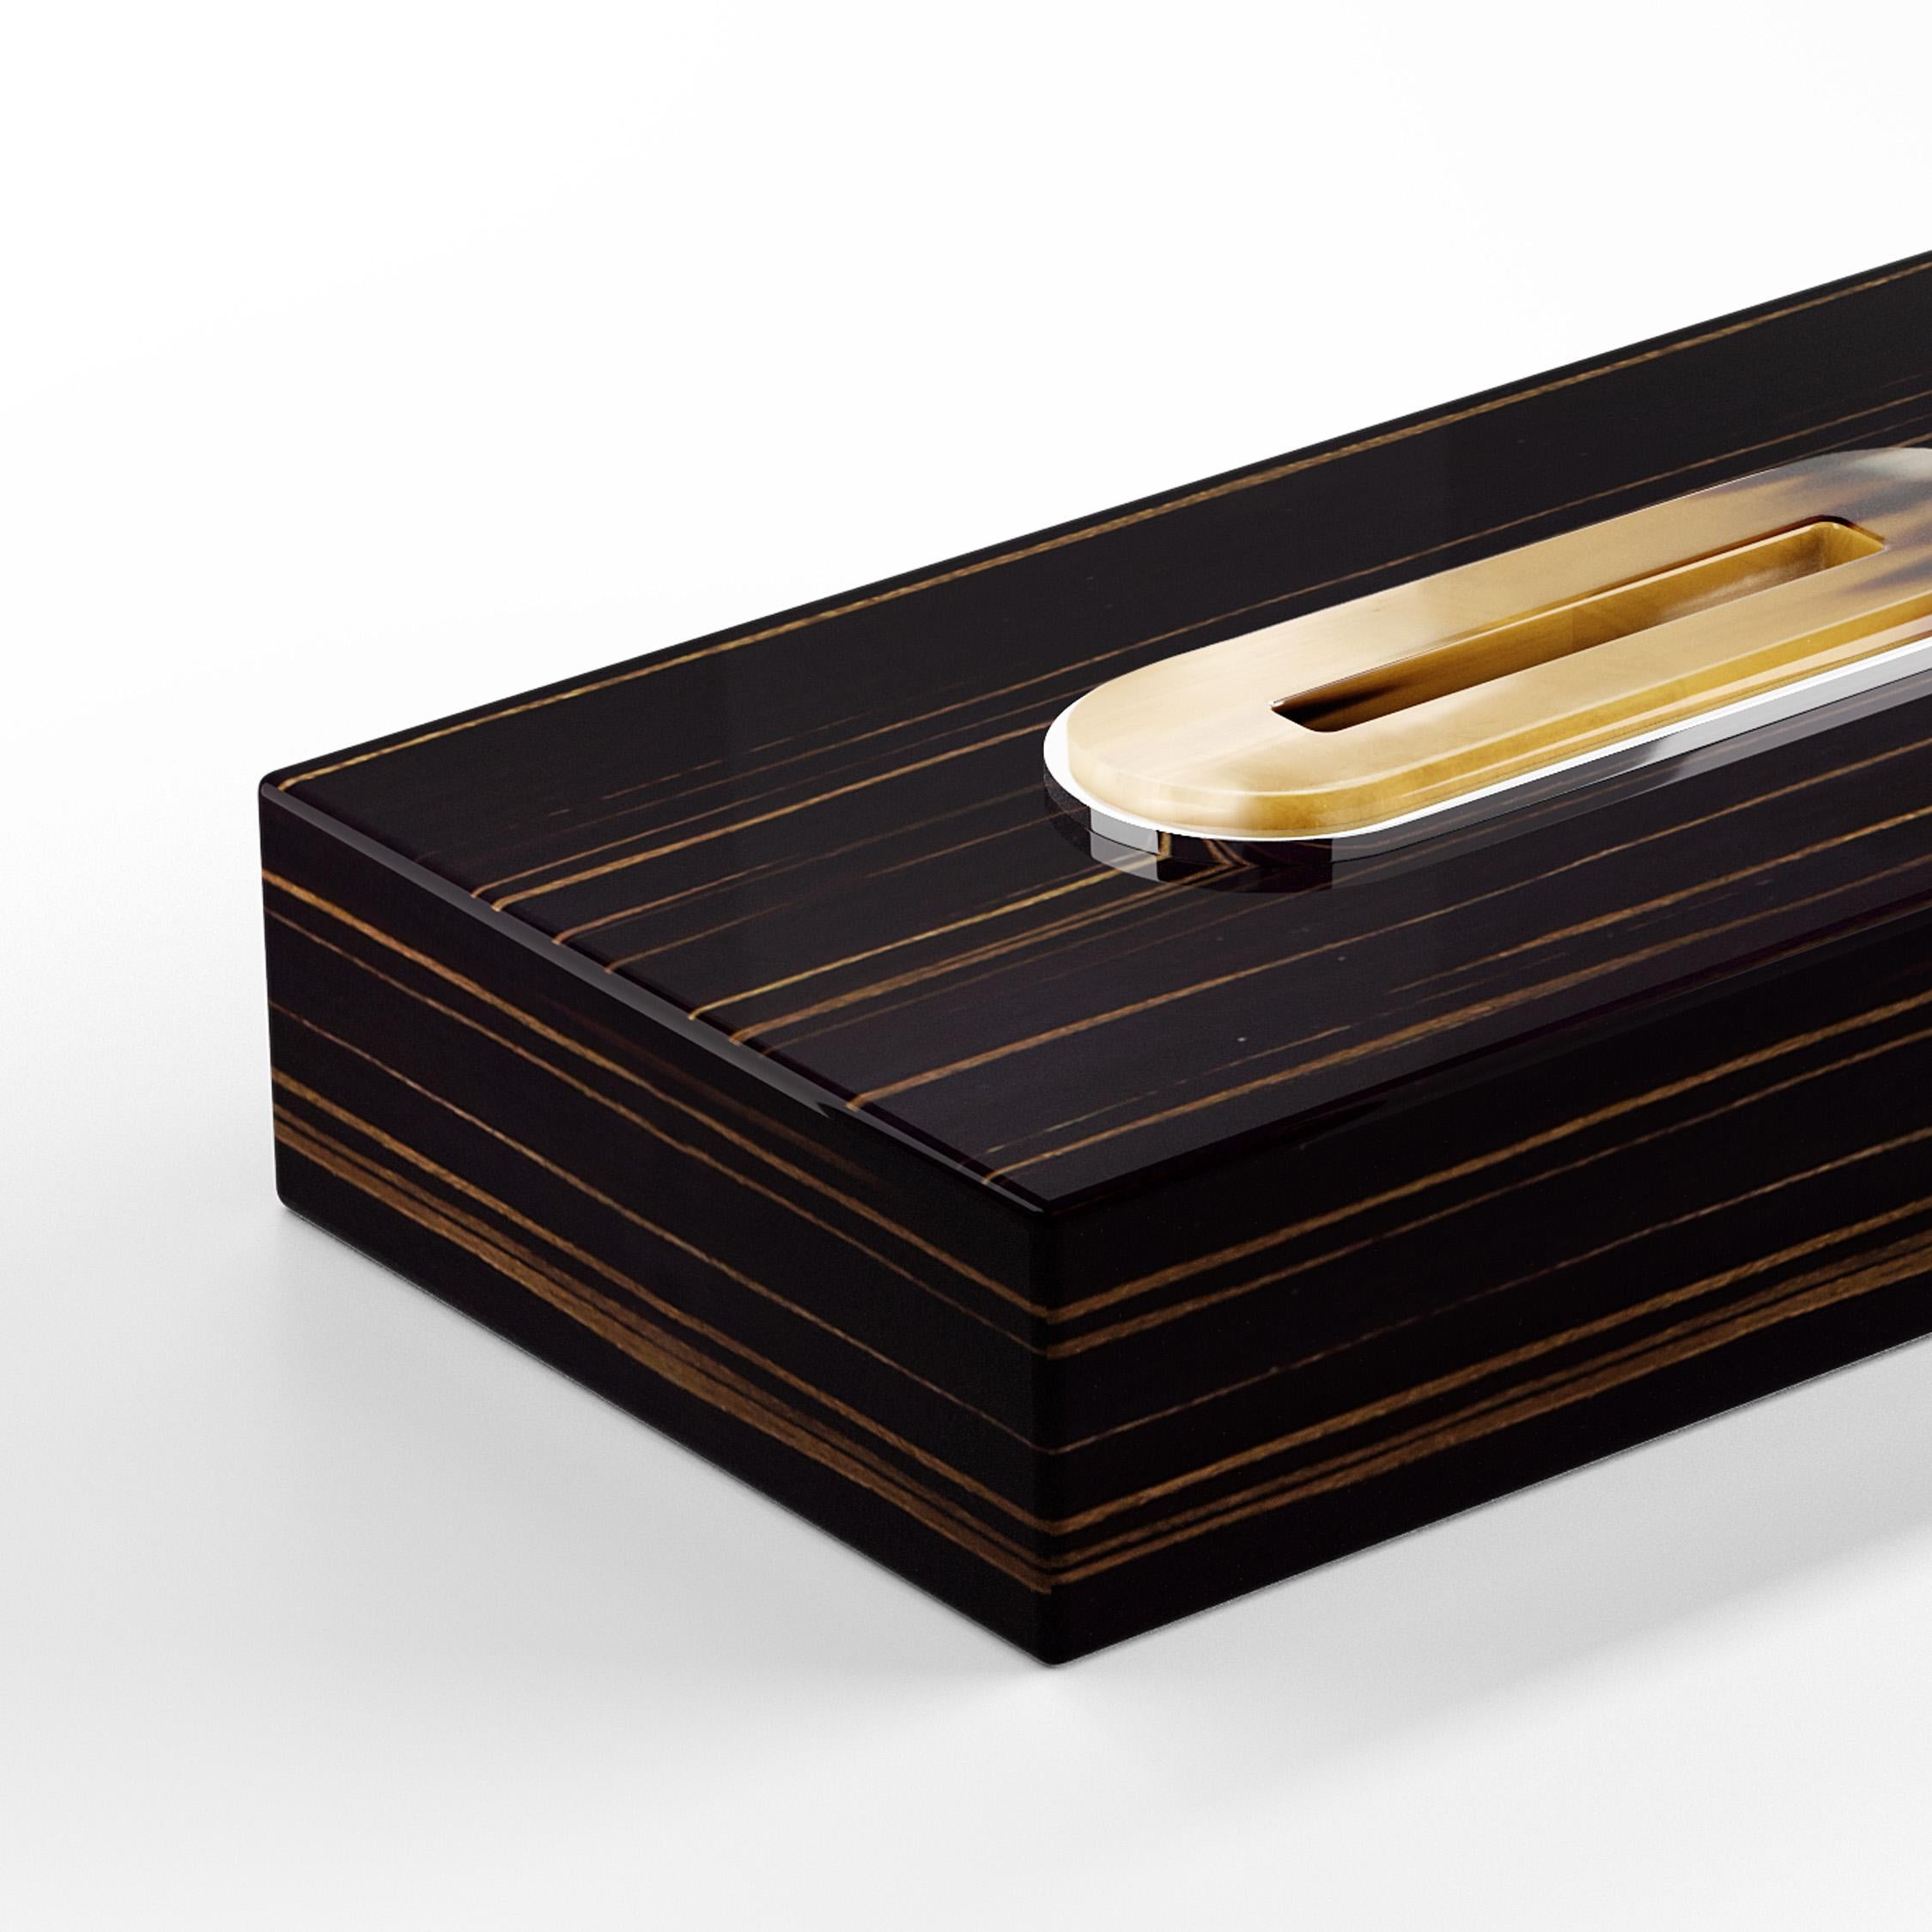 Elevate the decor of your bathroom, bedroom, or office with our Veletta tissue box holder. Combining style and functionality, Veletta is made of glossy ebony veneer, and it’s decorated by an elegant detail in natural Corno Italiano and chromed